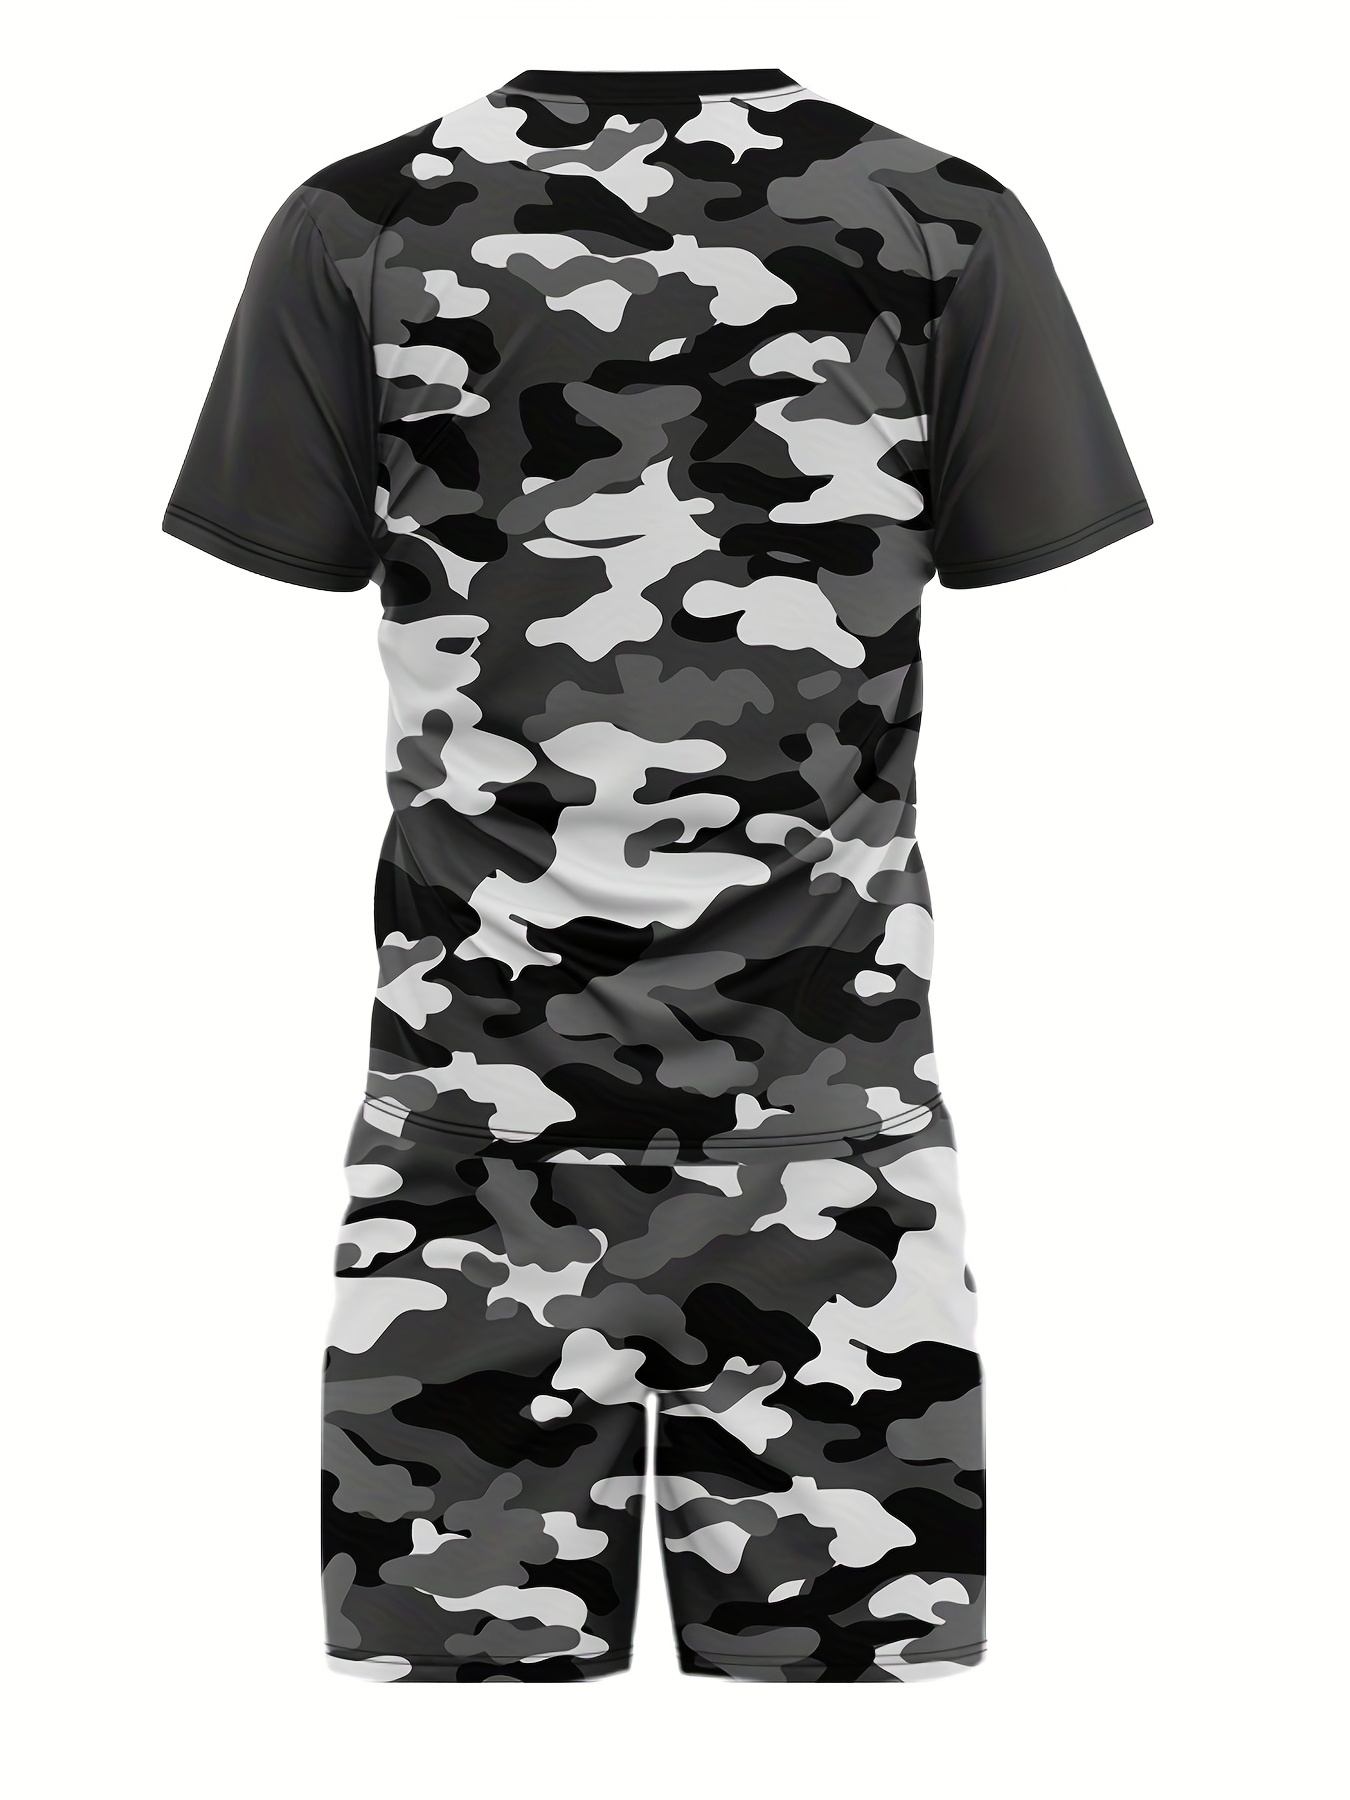 2pcs Camo Outfits For Men Casual Crew Neck Short Sleeve T Shirt